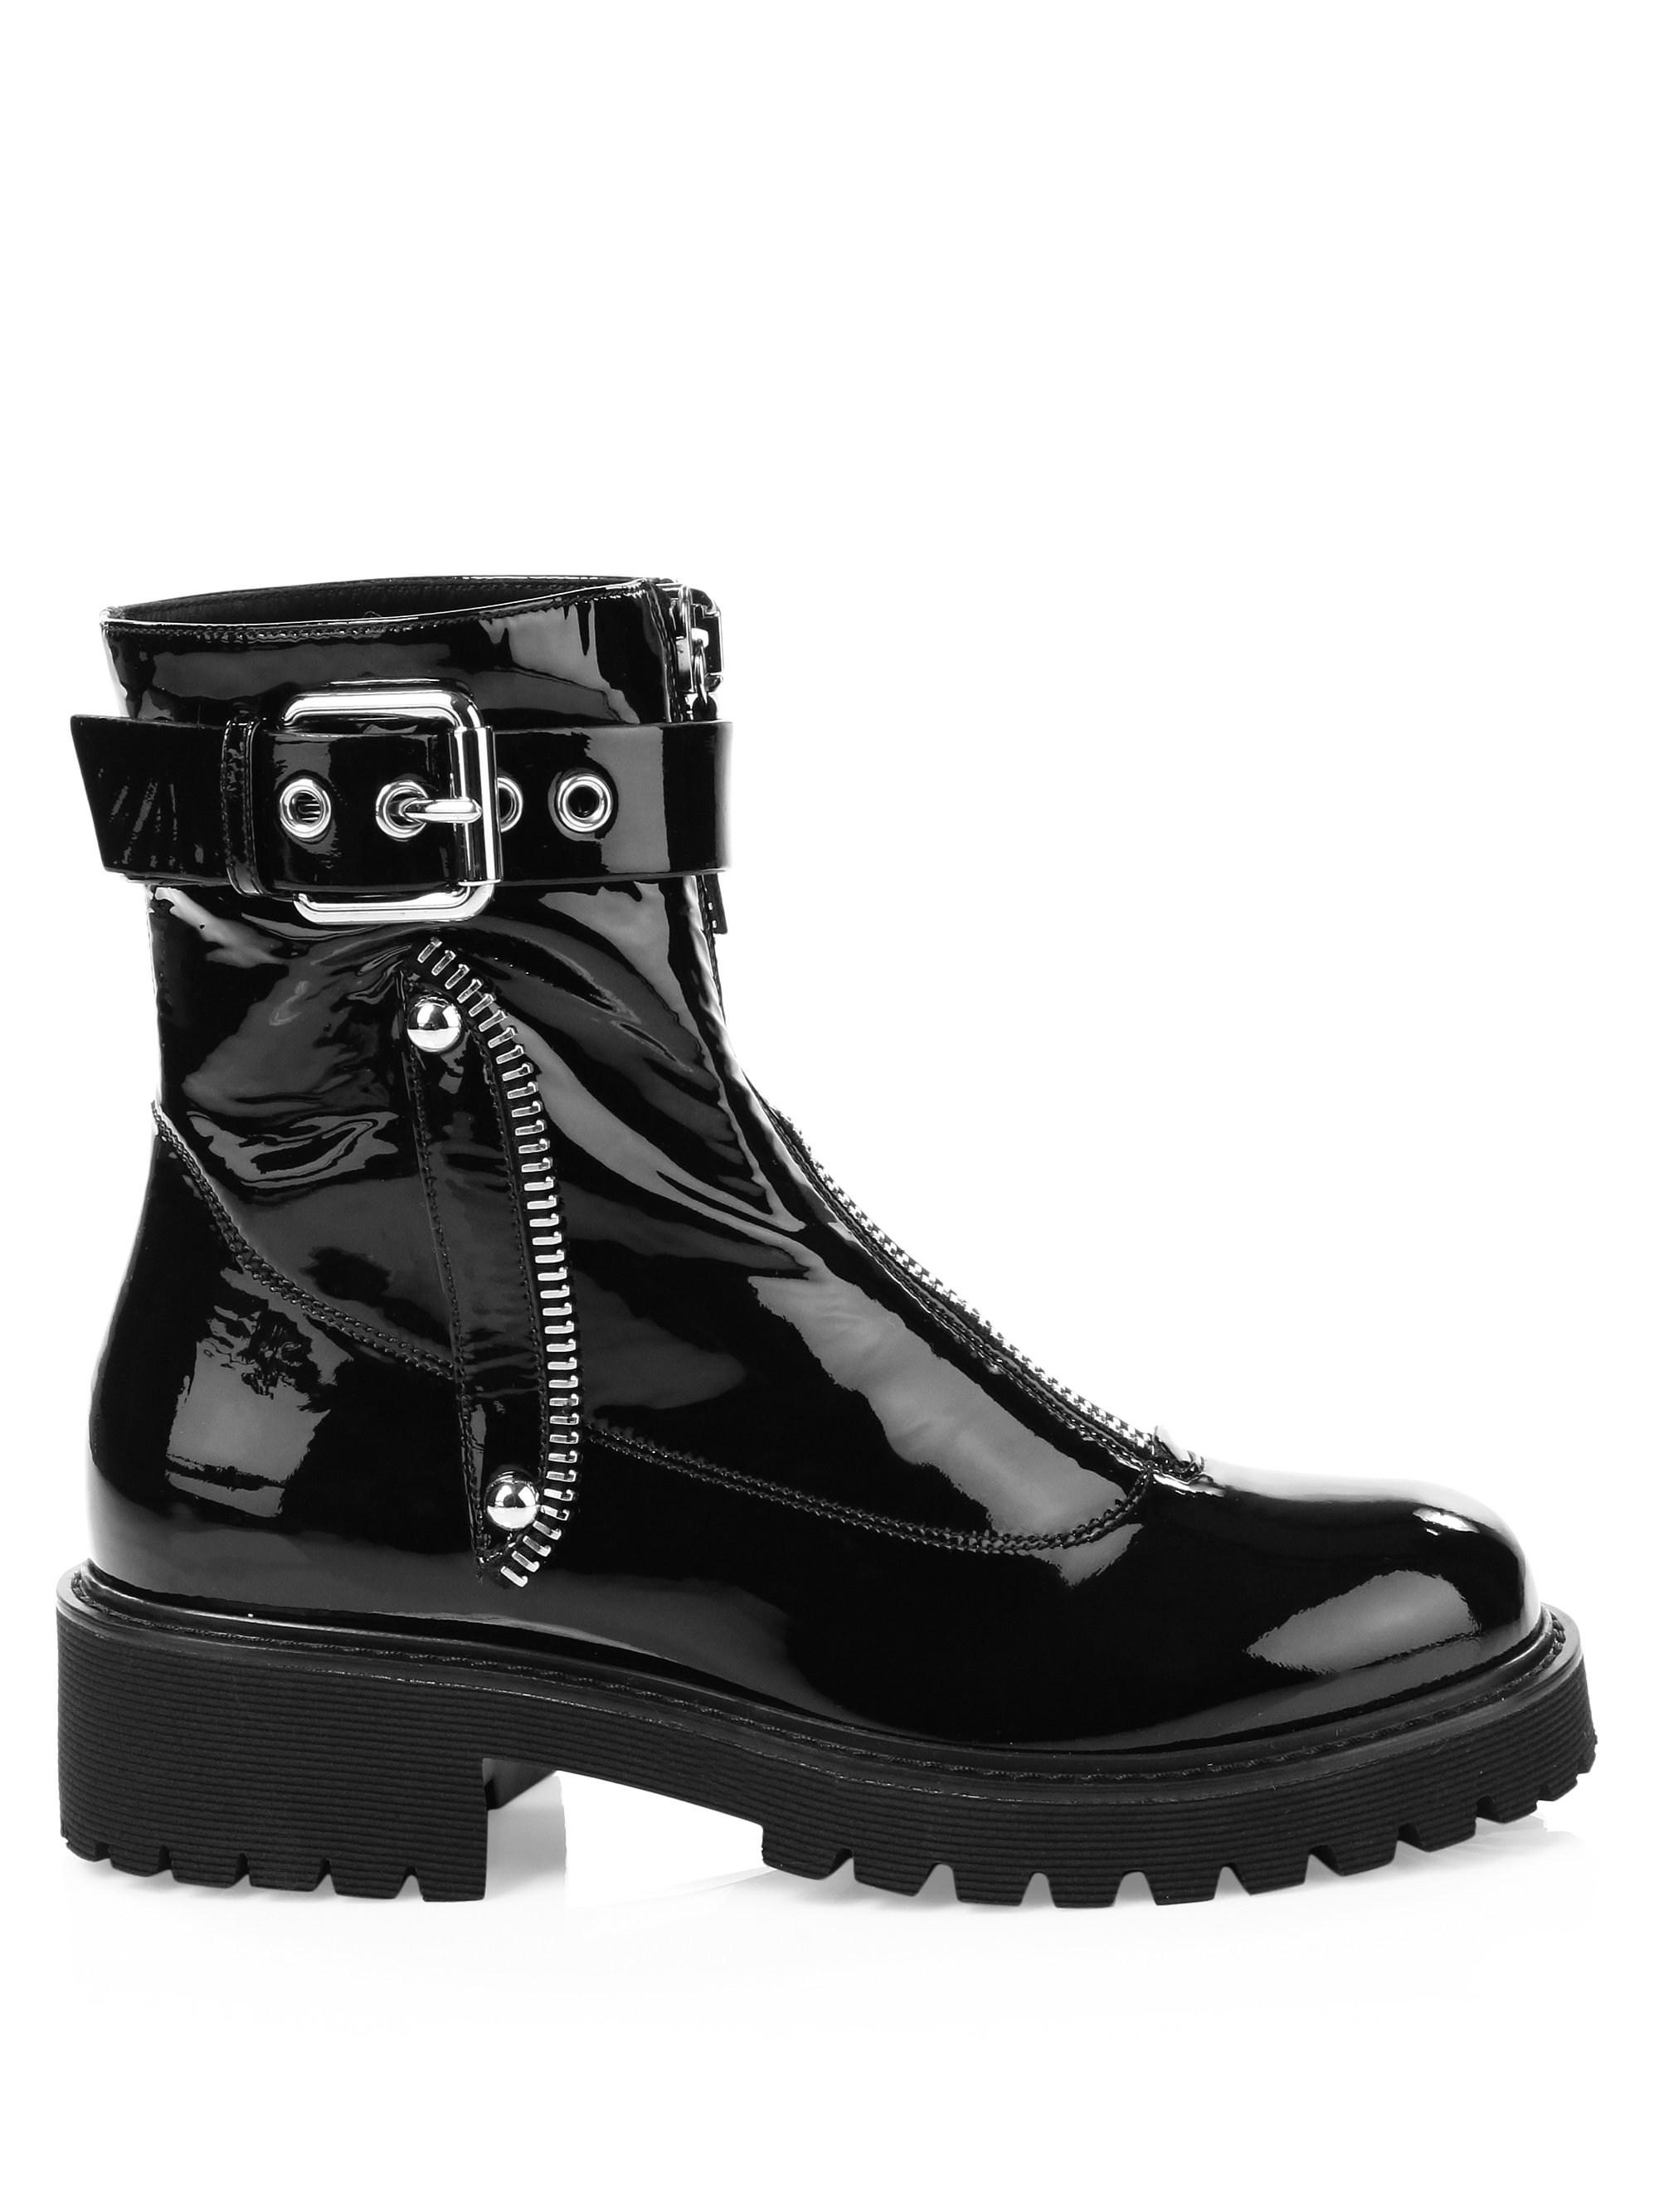 Giuseppe Zanotti Patent Leather Front-zip Combat Boots in Black - Lyst